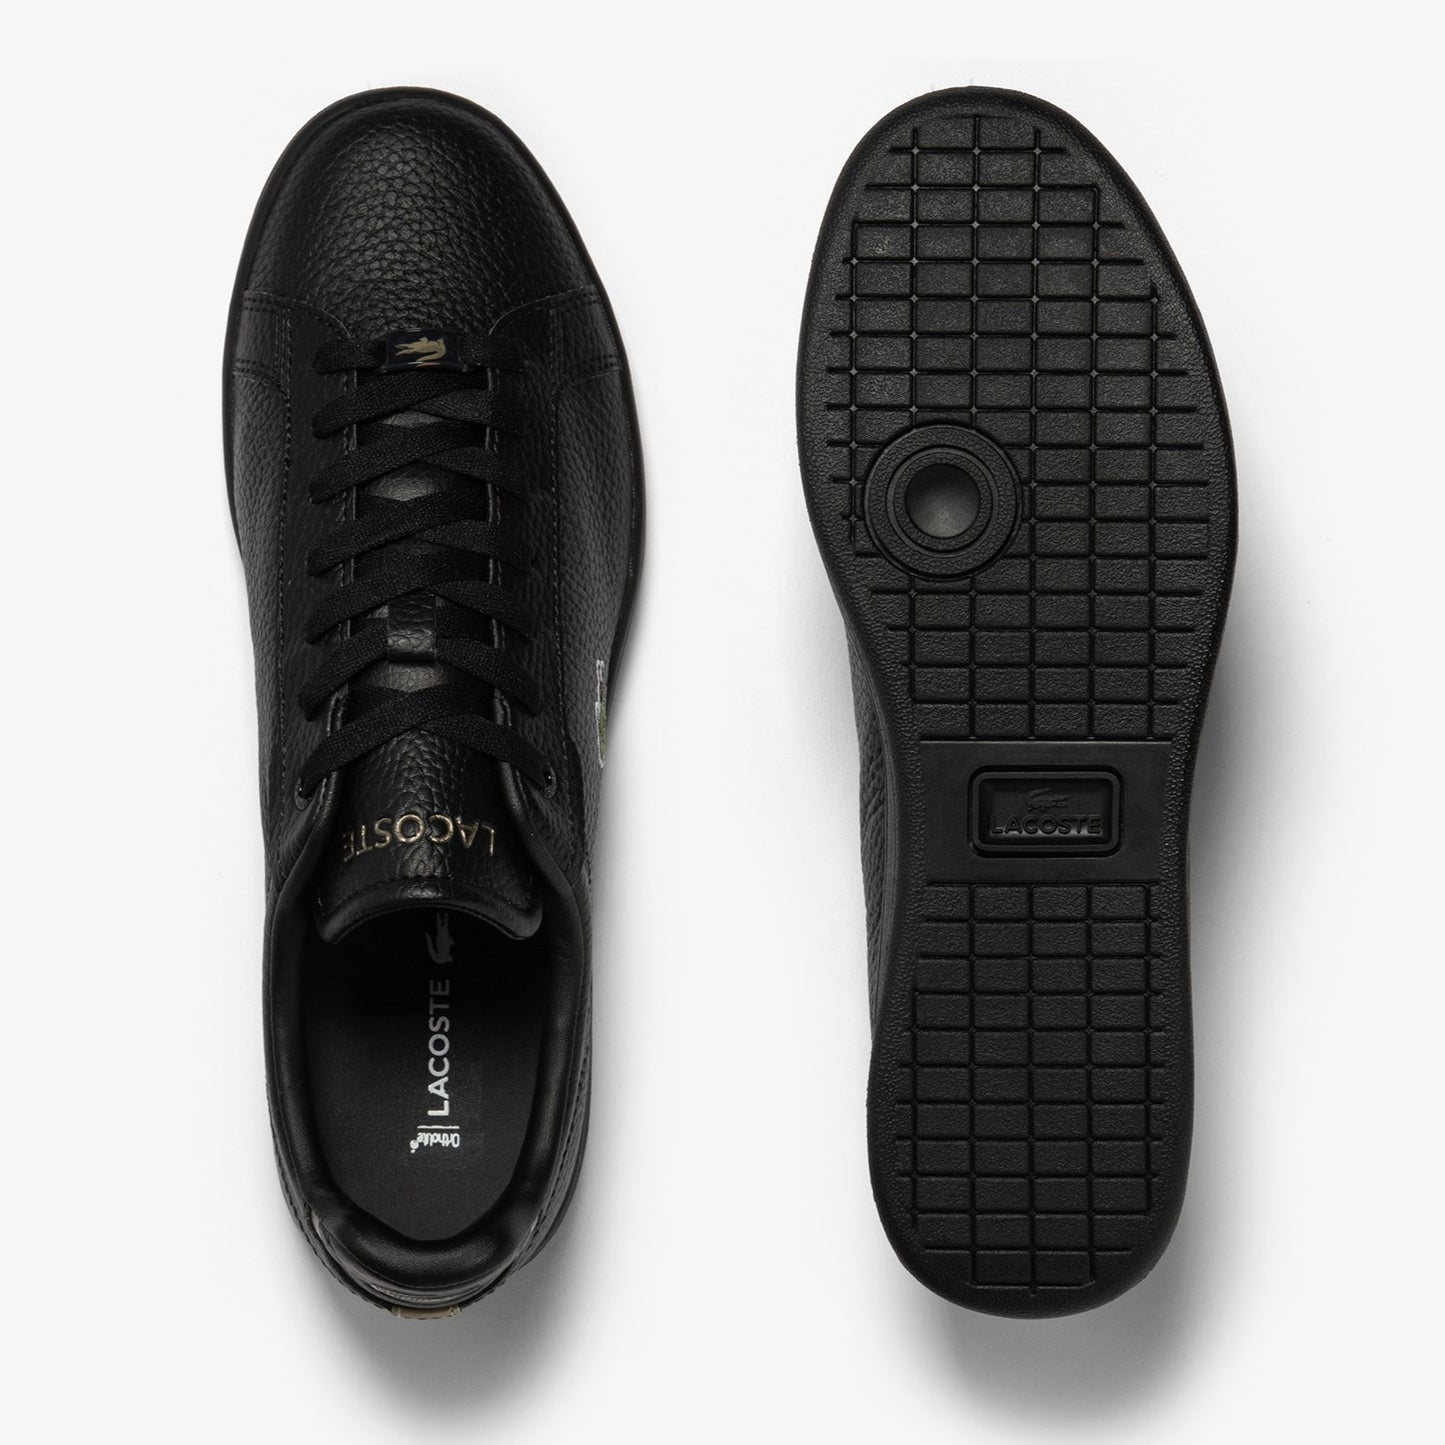 LACOSTE Men's Carnaby Pro Leather Sneakers - Black/Black